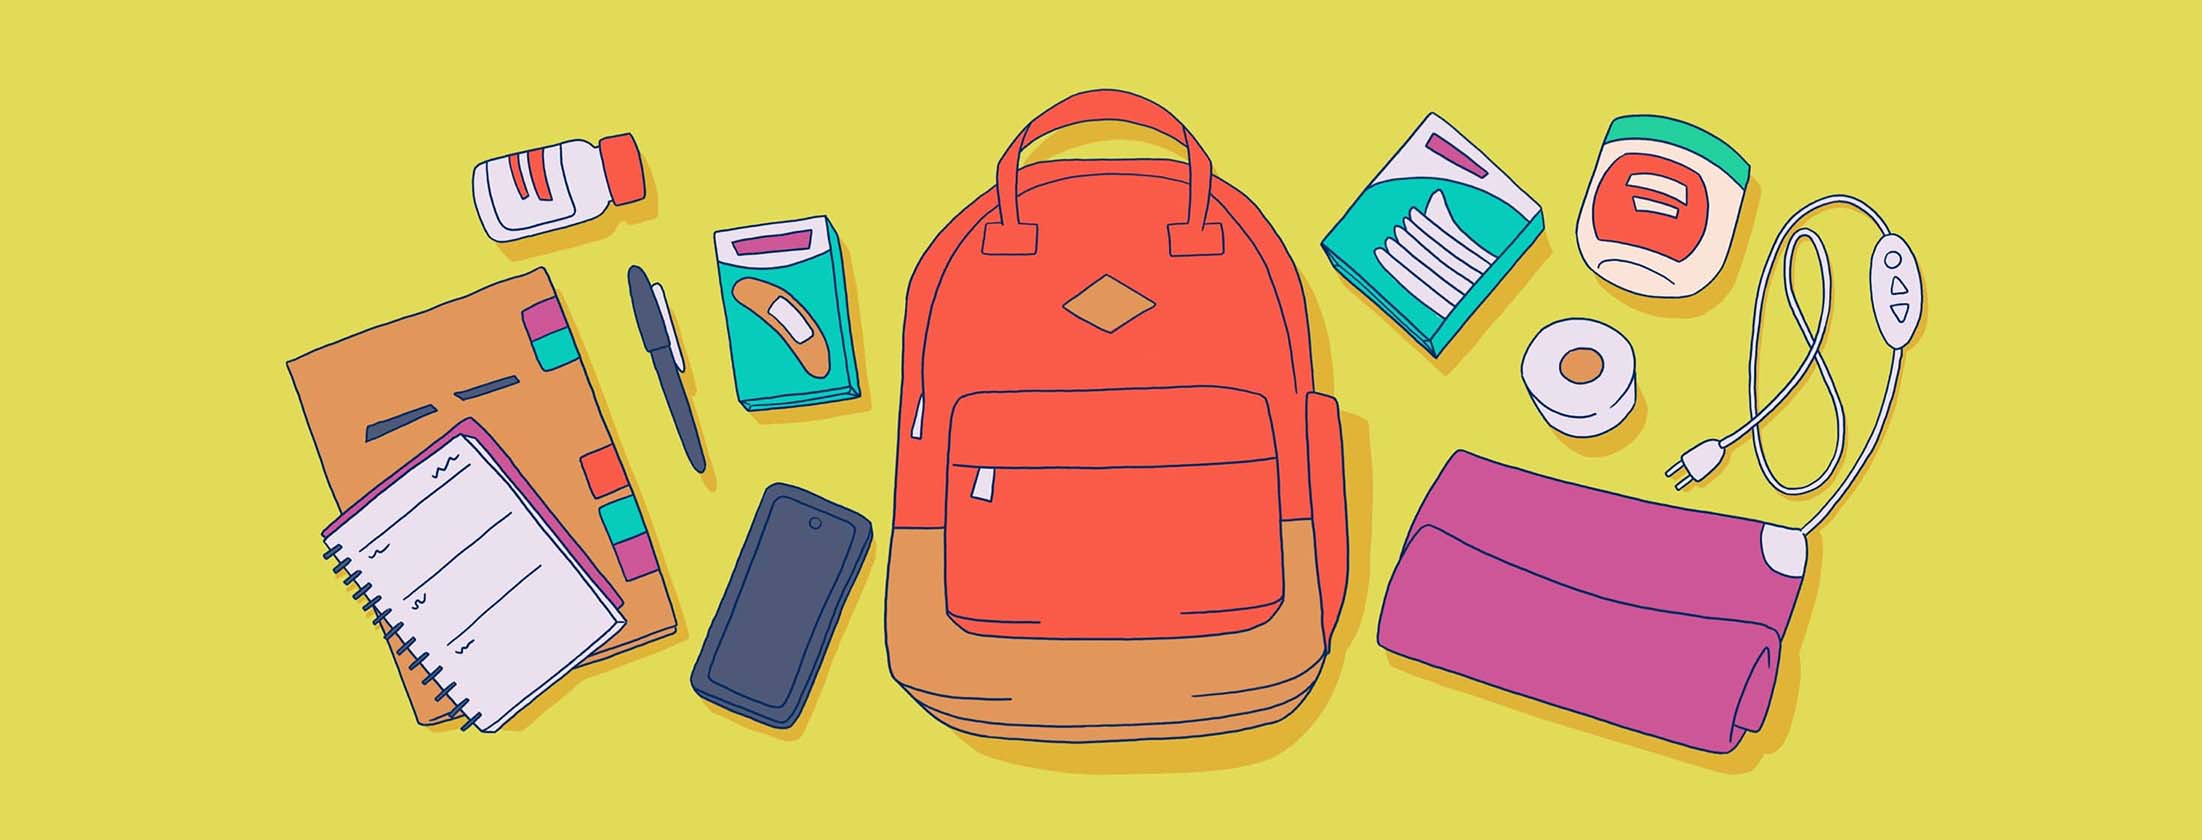 School backpack surrounded by items for wound care, daily planning, and medical documentation